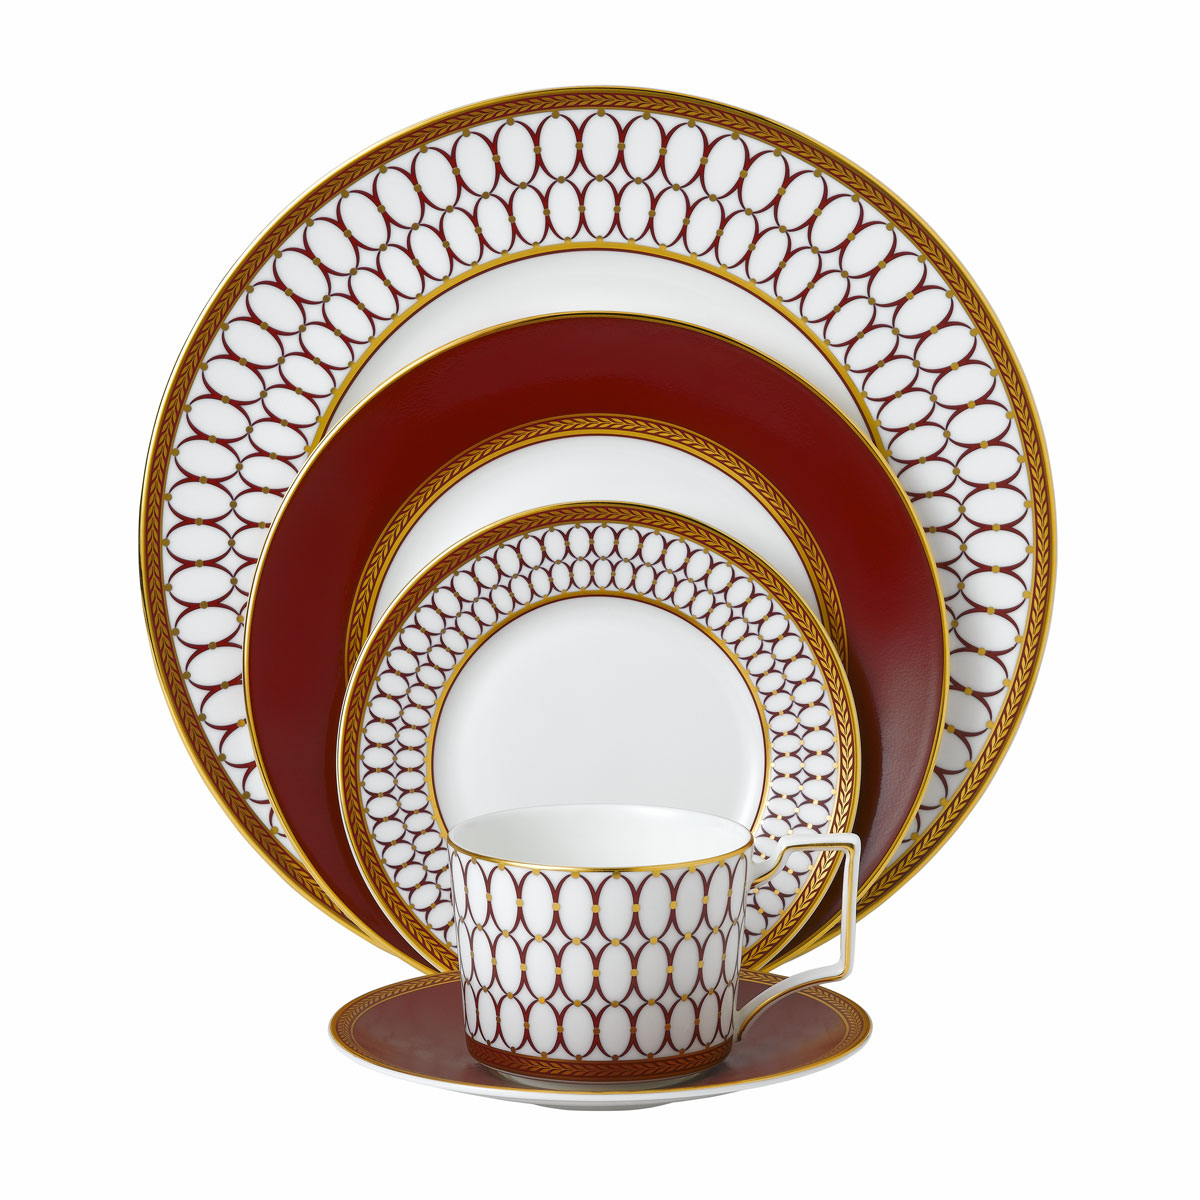 Wedgwood Renaissance Red 5 Piece Place Setting